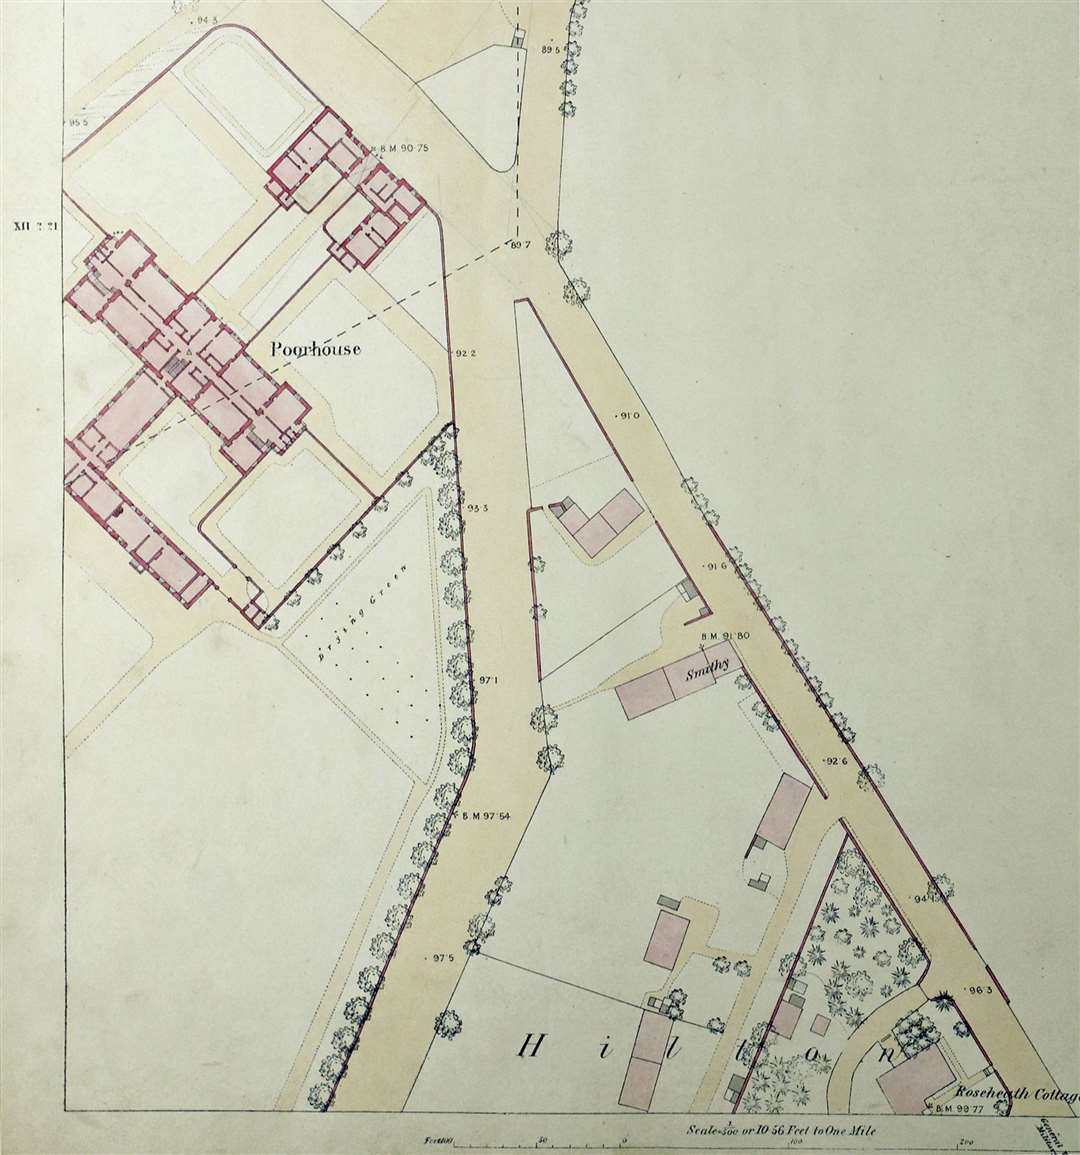 Ordnance Survey map showing the location of Inverness Poorhouse.